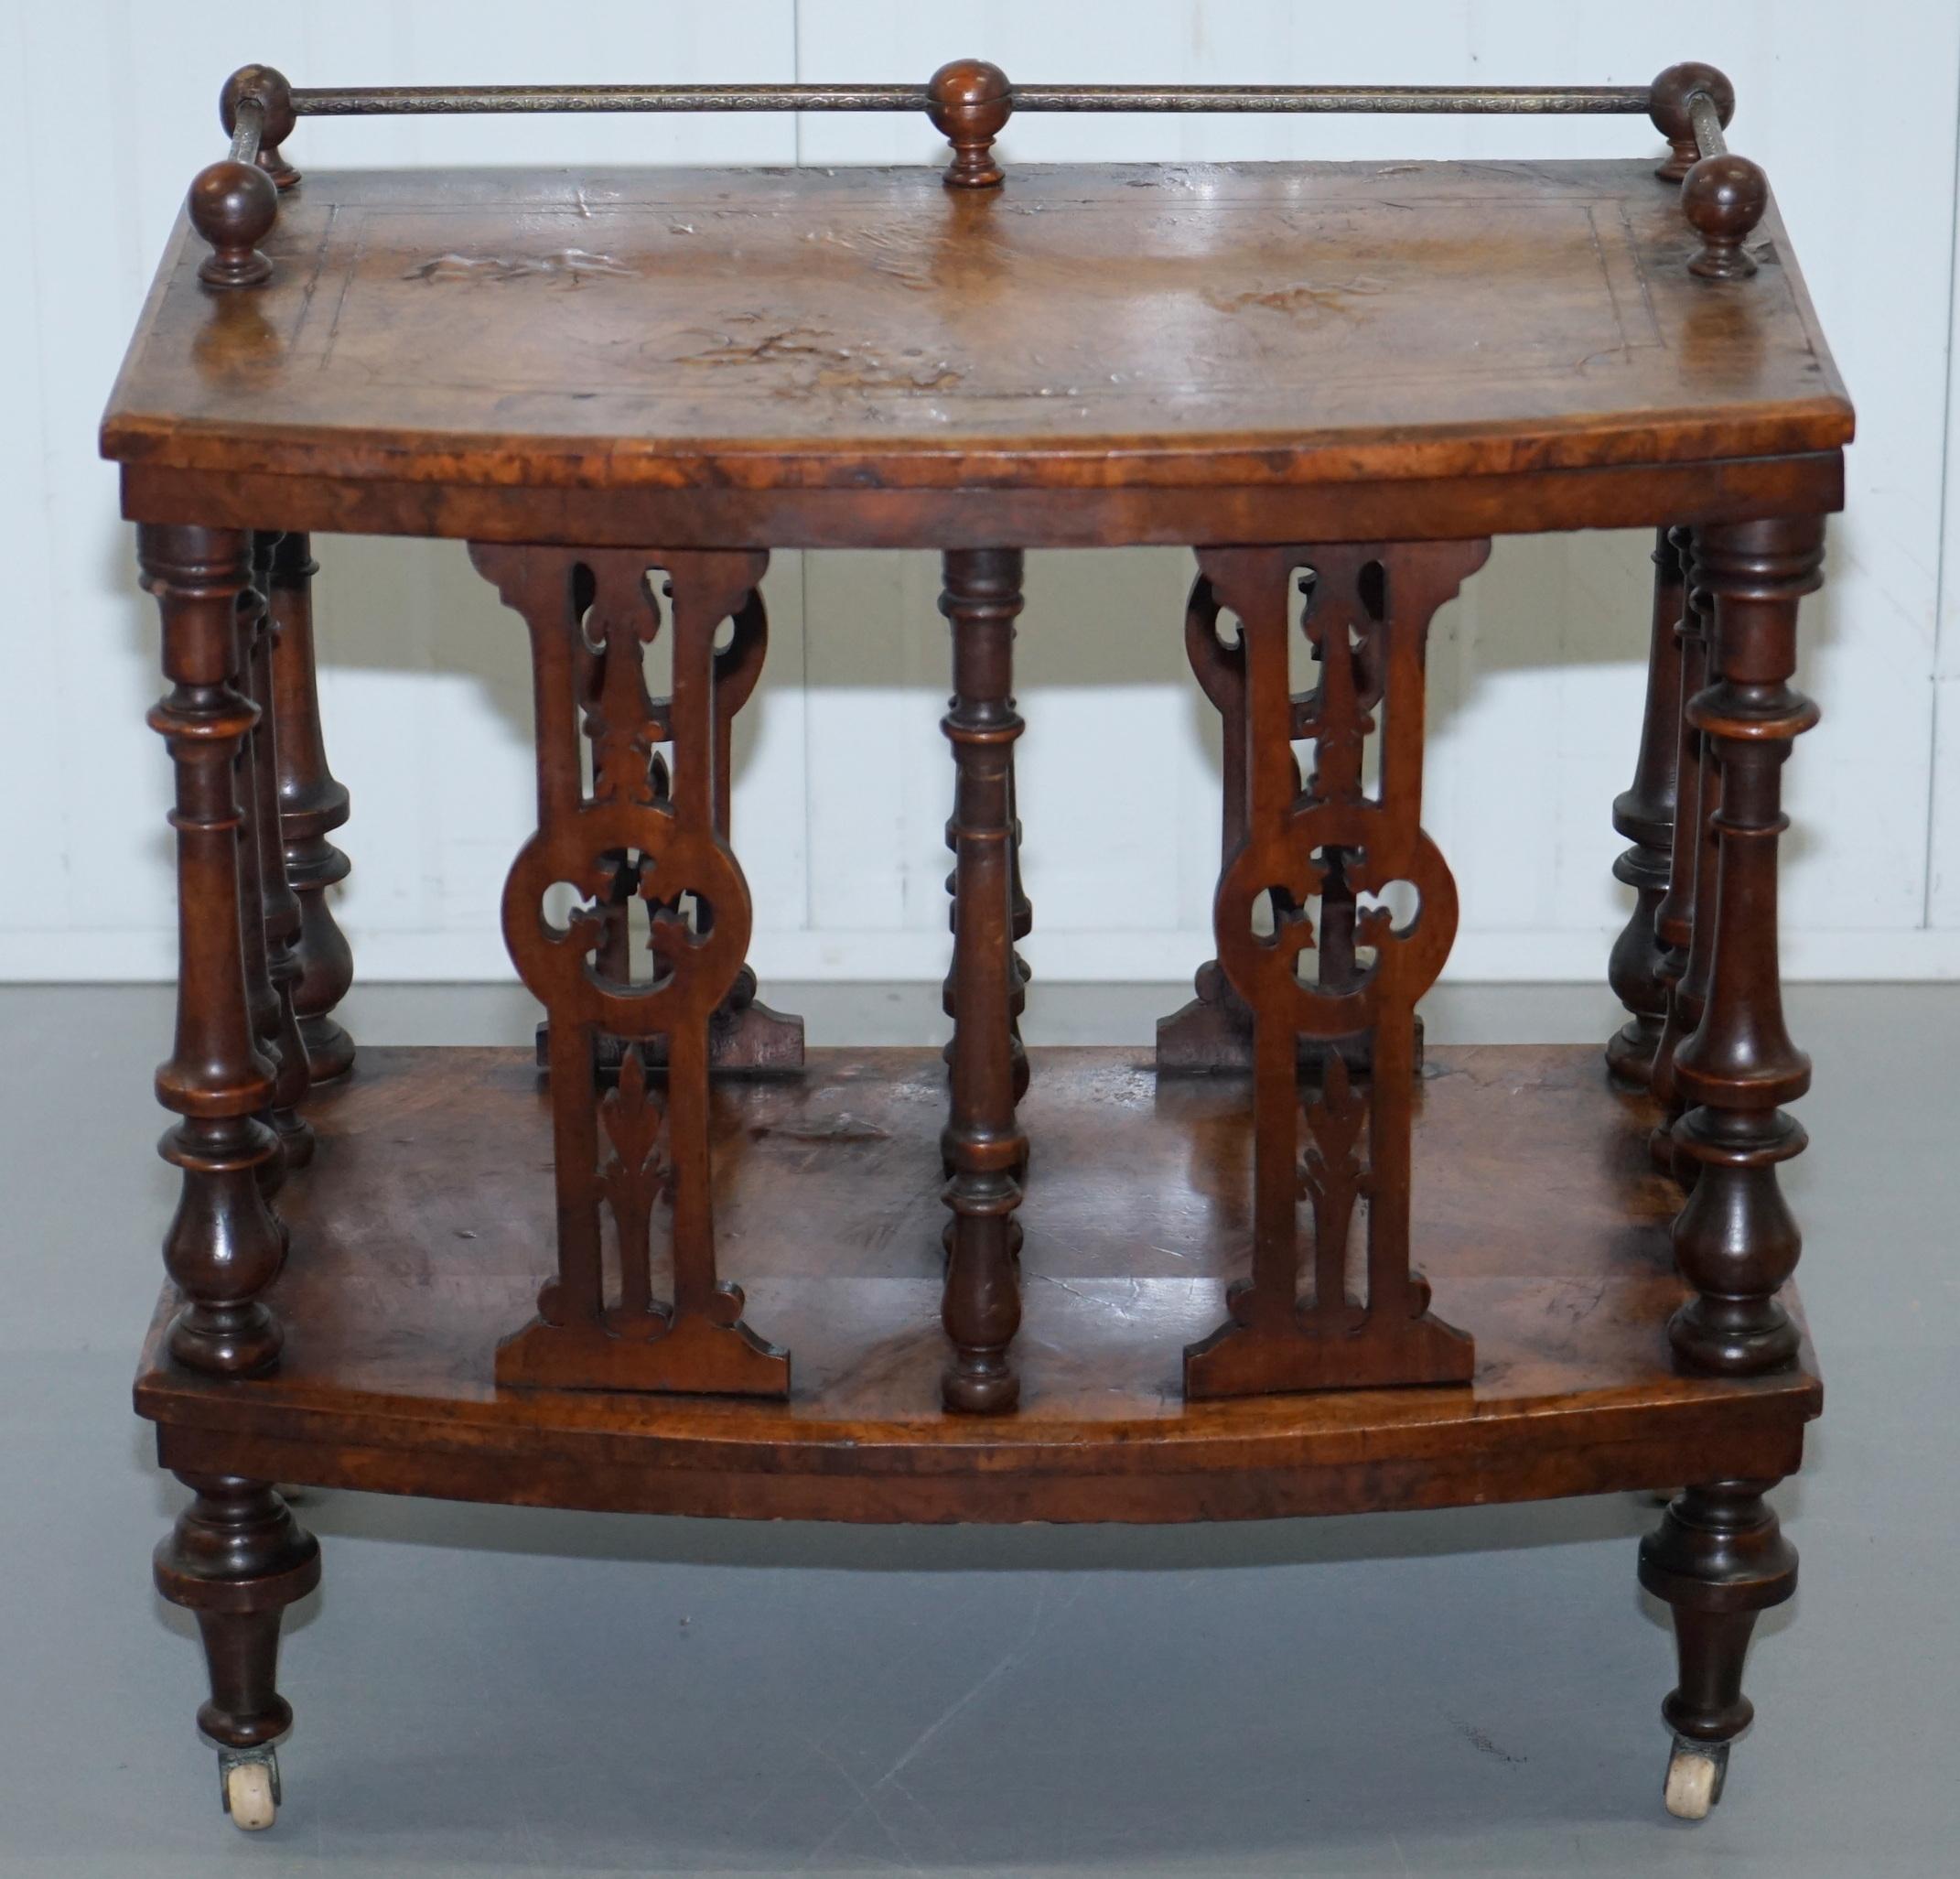 We are delighted to offer for sale this very rare solid Burr walnut Canterbury music stand with ornate carving, original castors and bronze engraved rails on top

A good looking rare and valuable piece of furniture, these sell for a small fortune